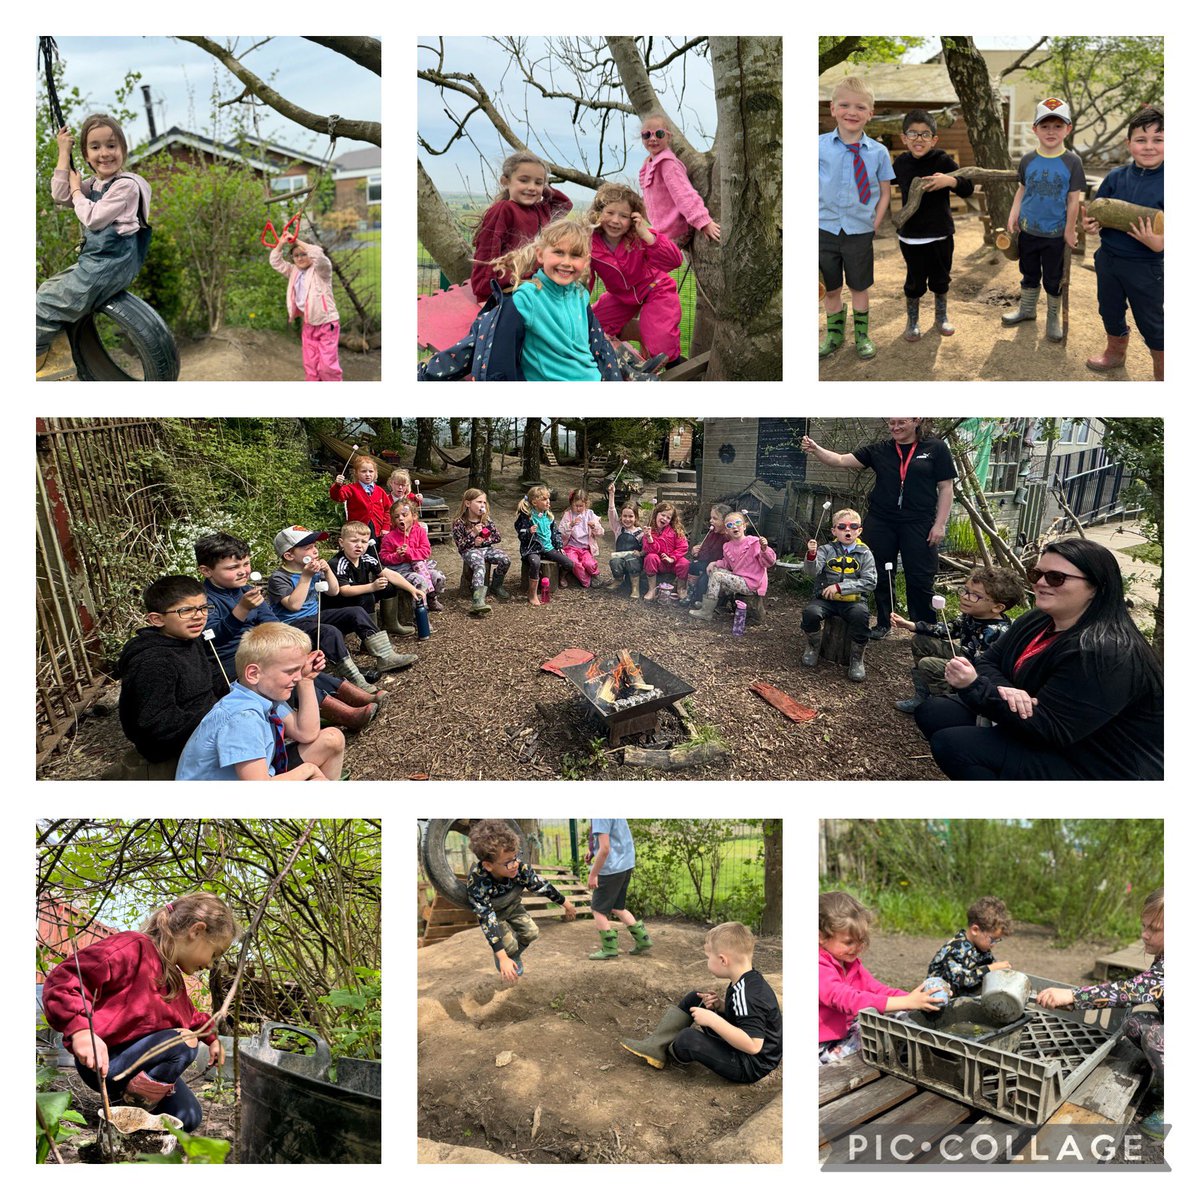 Toasted marshmallows and muddylicious play 💚#forestschool #year1 #makingmemories #nochildleftinside